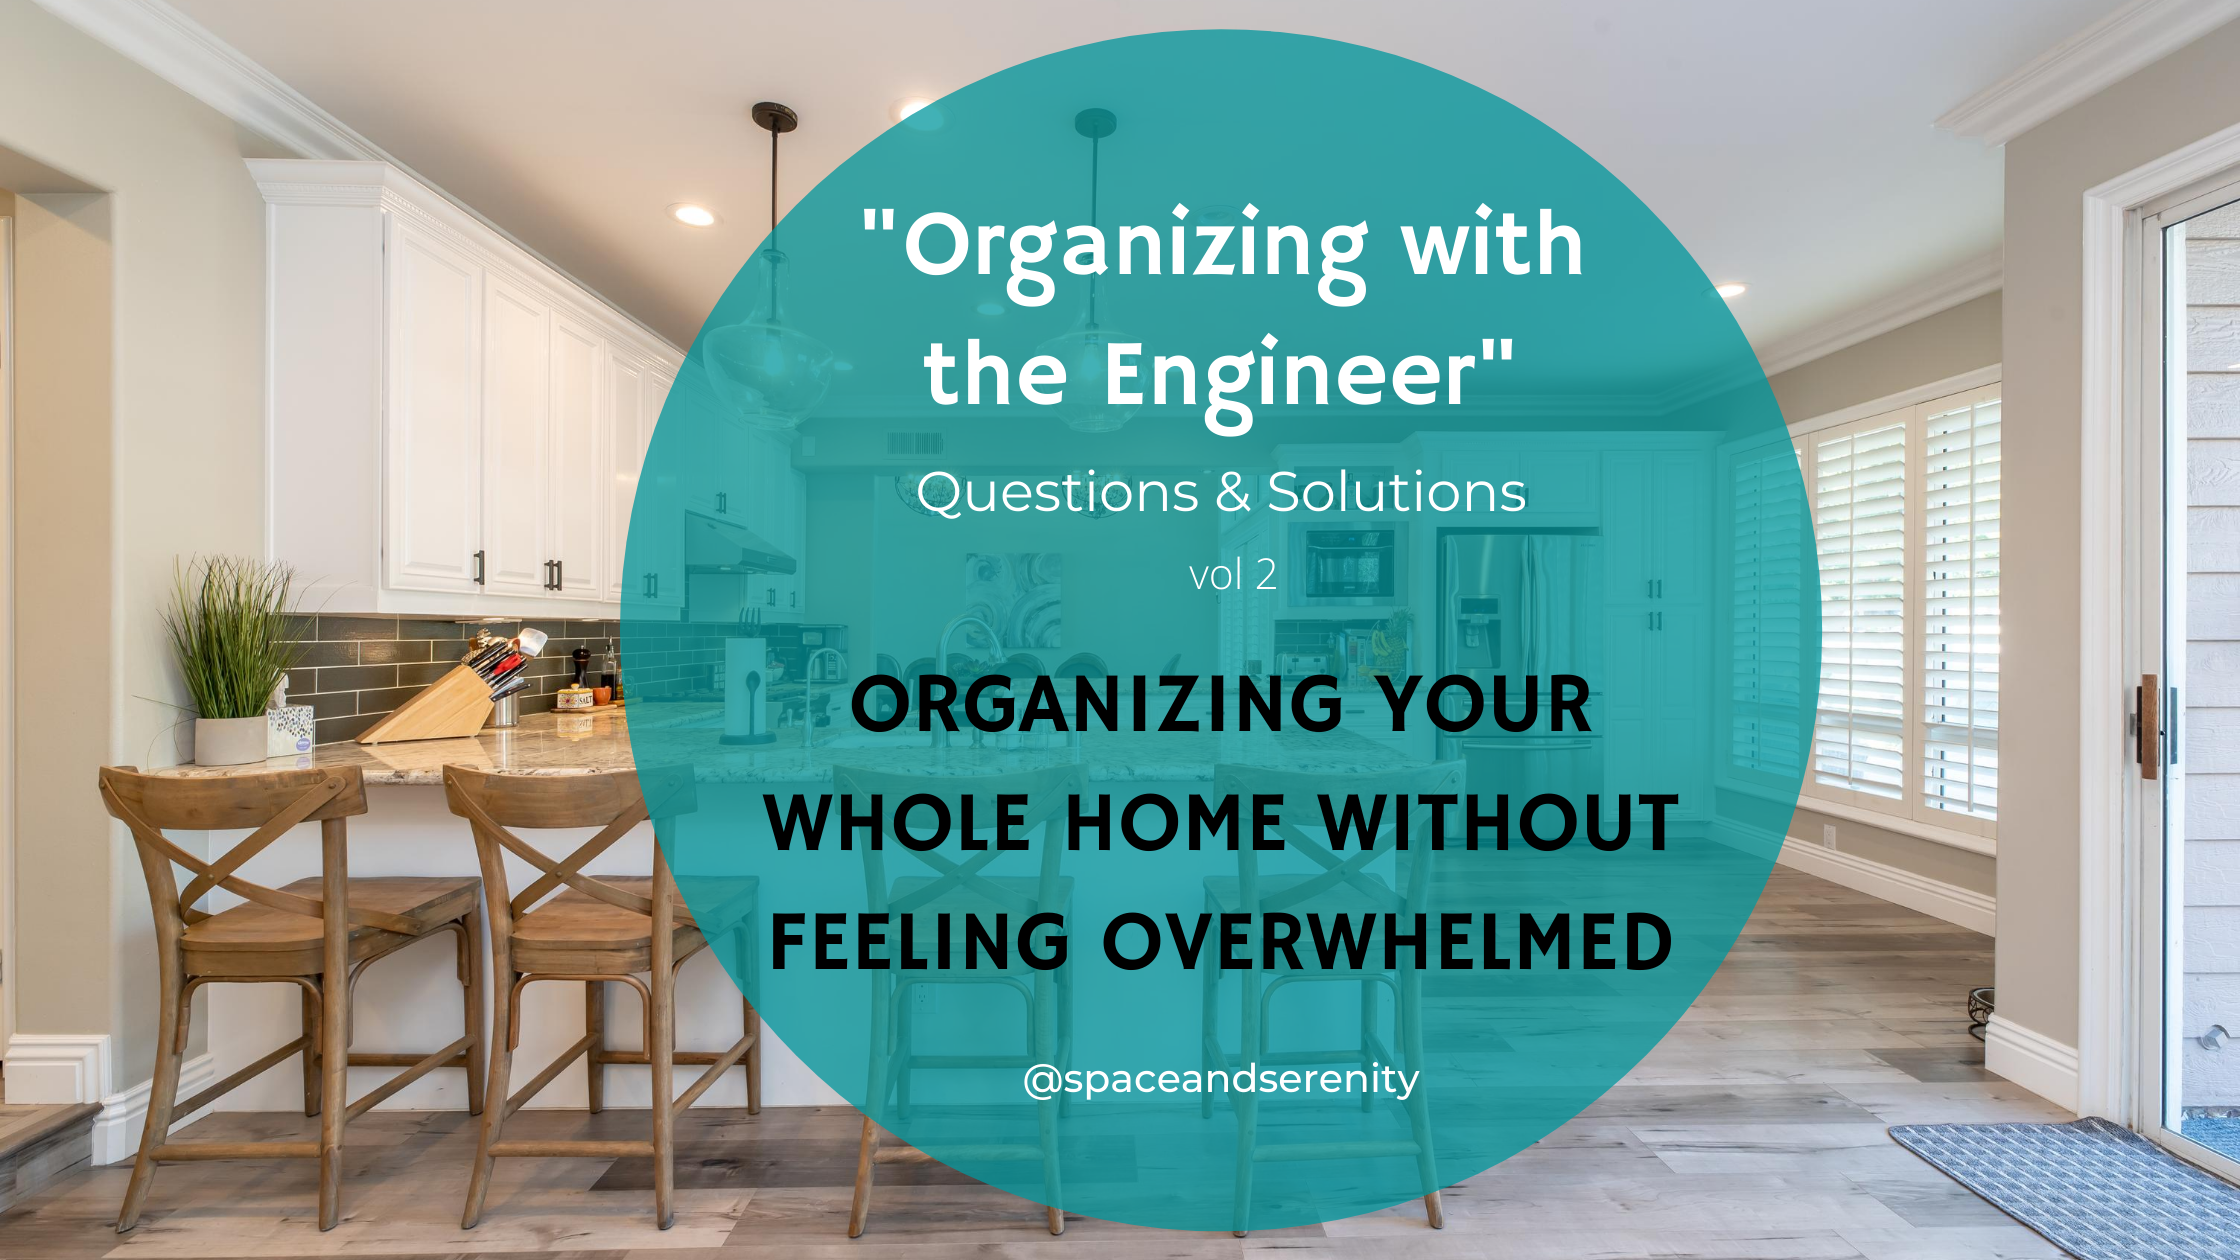 Organizing Your Whole Home Without Feeling Overwhelmed